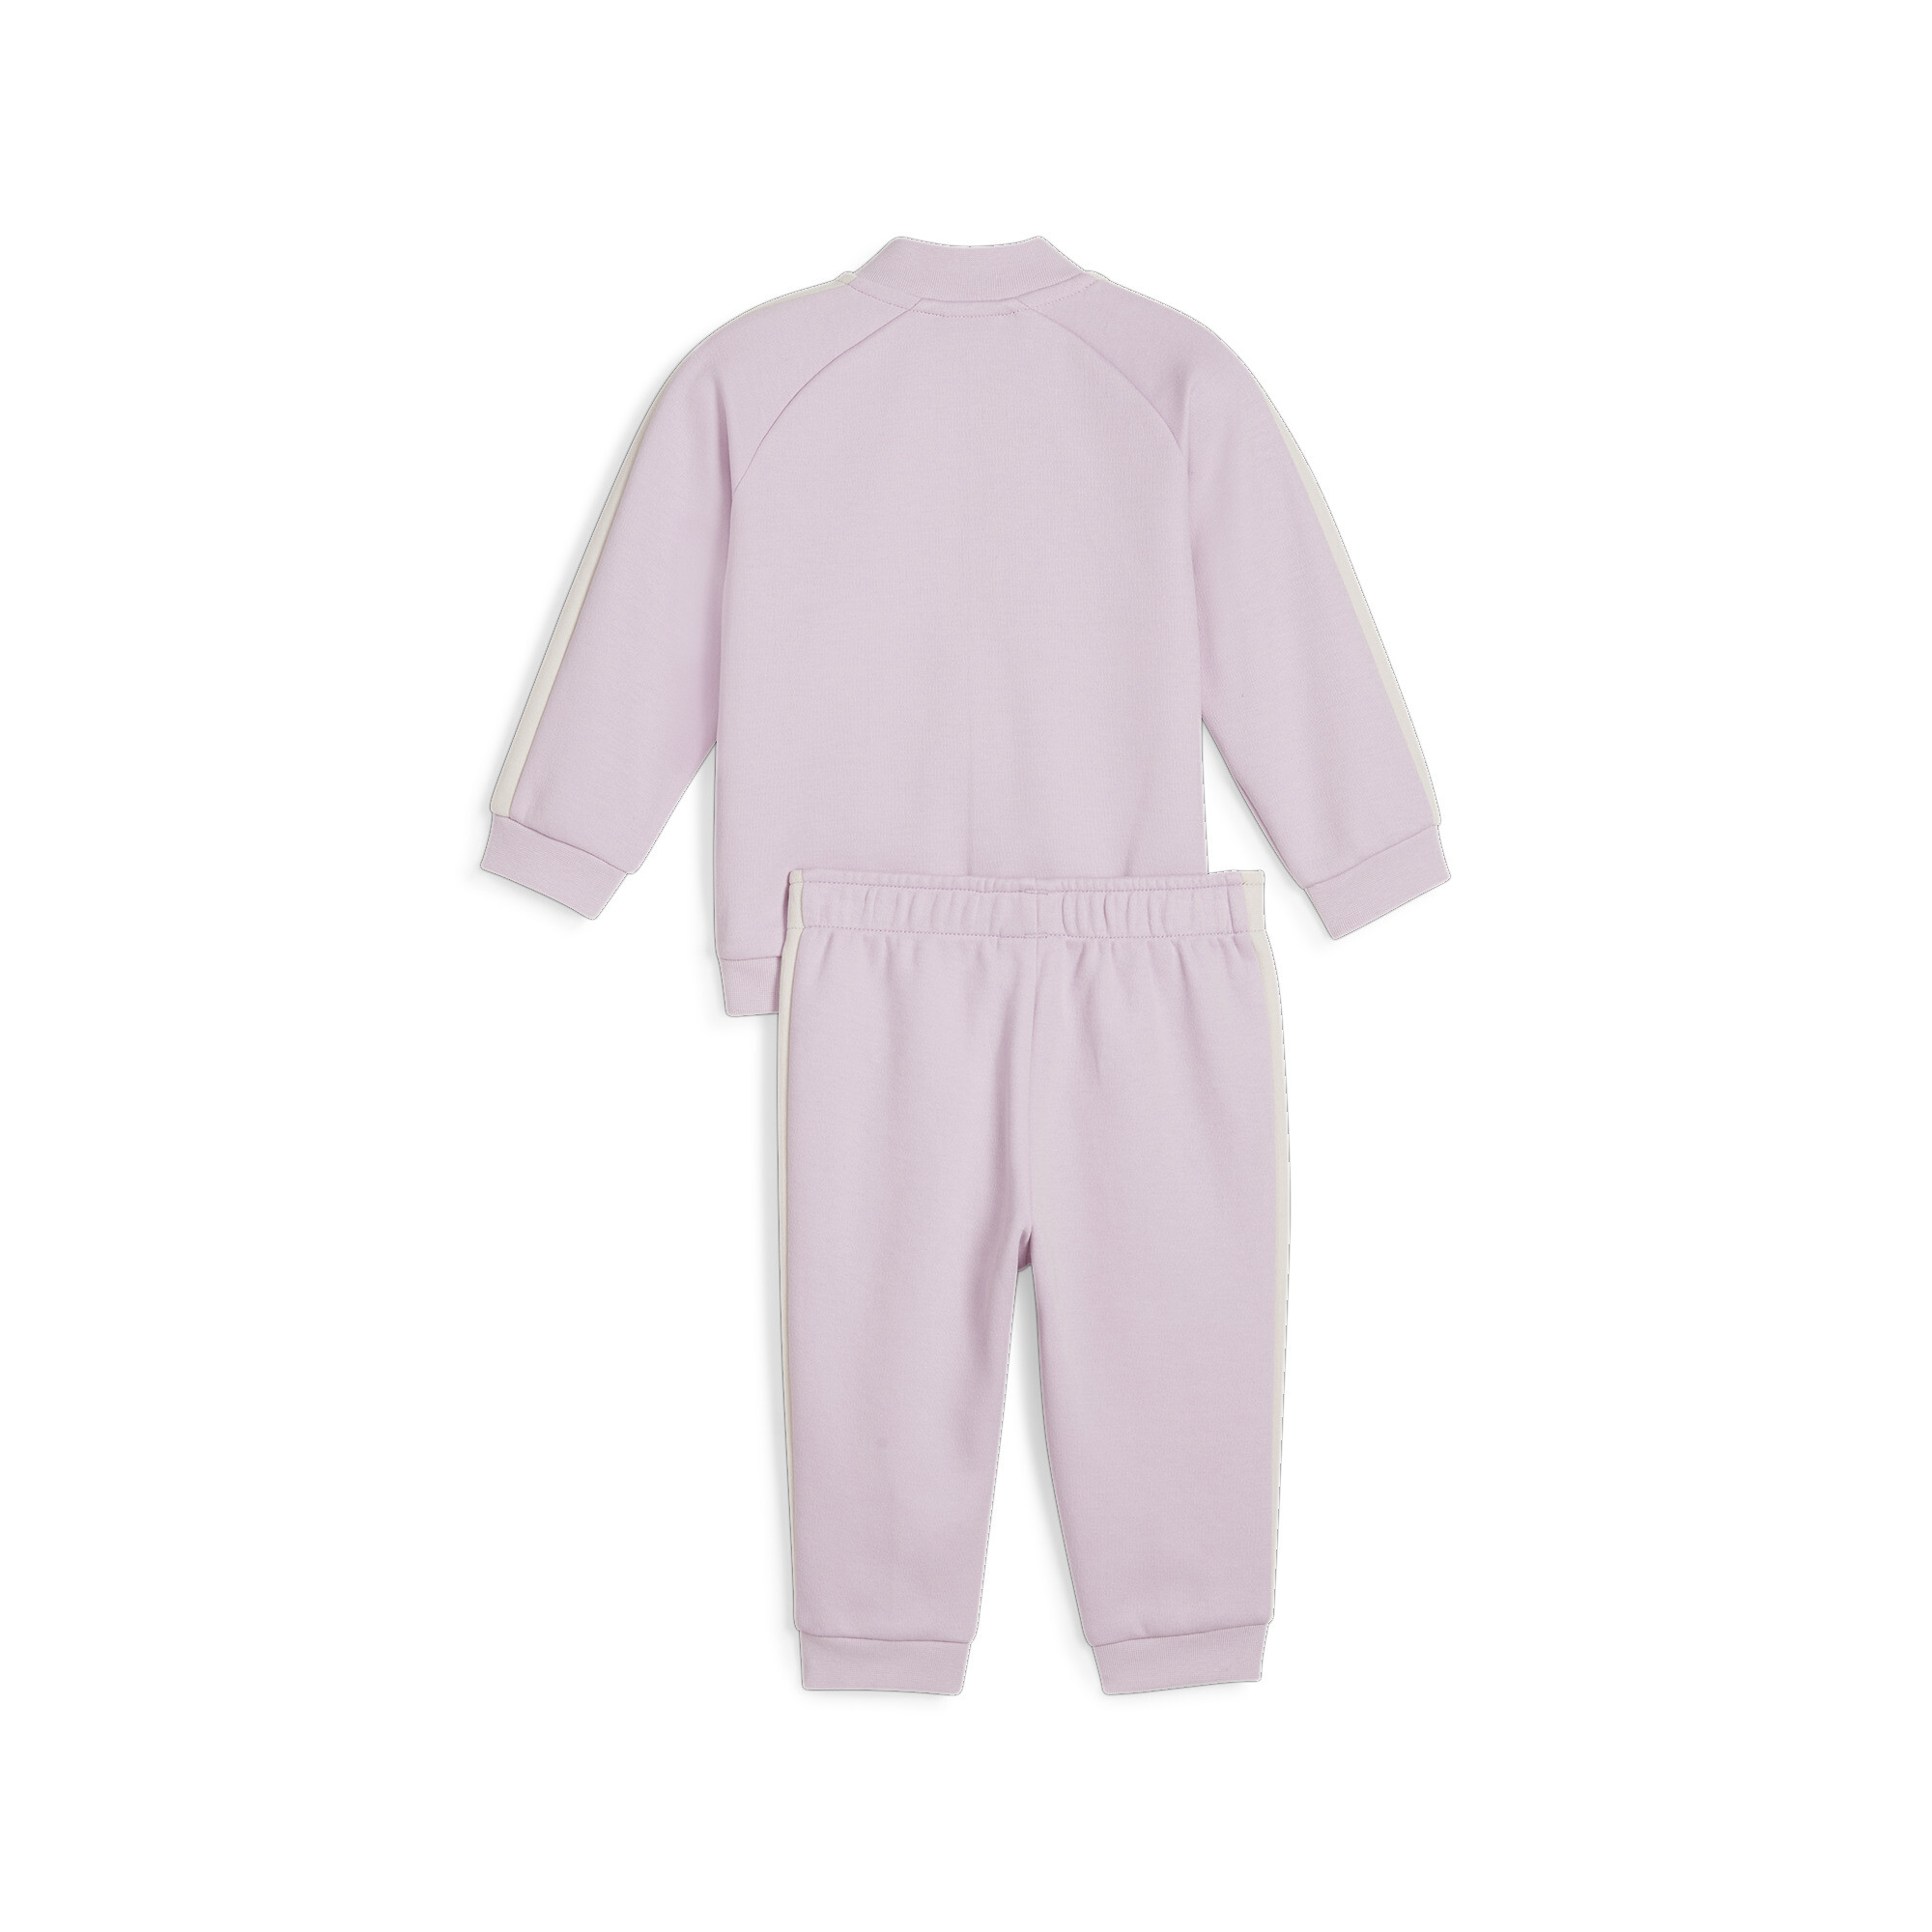 PUMA MINICATS T7 ICONIC Baby Tracksuit Set In Purple, Size 3-4 Youth